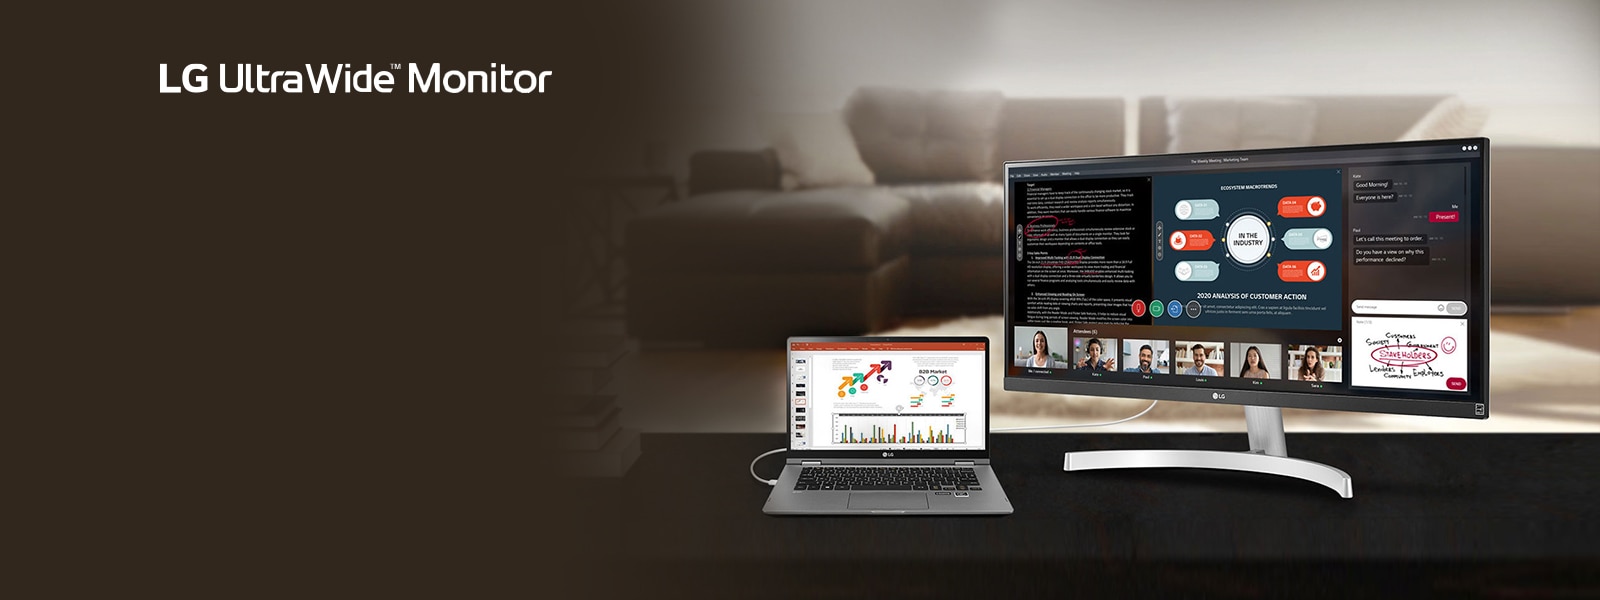 The image shows the LG UltraWide™ Monitor product with the wide screen splitted to 4 parts for an ongoing Webinar, consisting of a text document to discuss, a PowerPoint slide, 5 videos of each of 5 participants, and the chatting screen with an diagram drawing image to send.